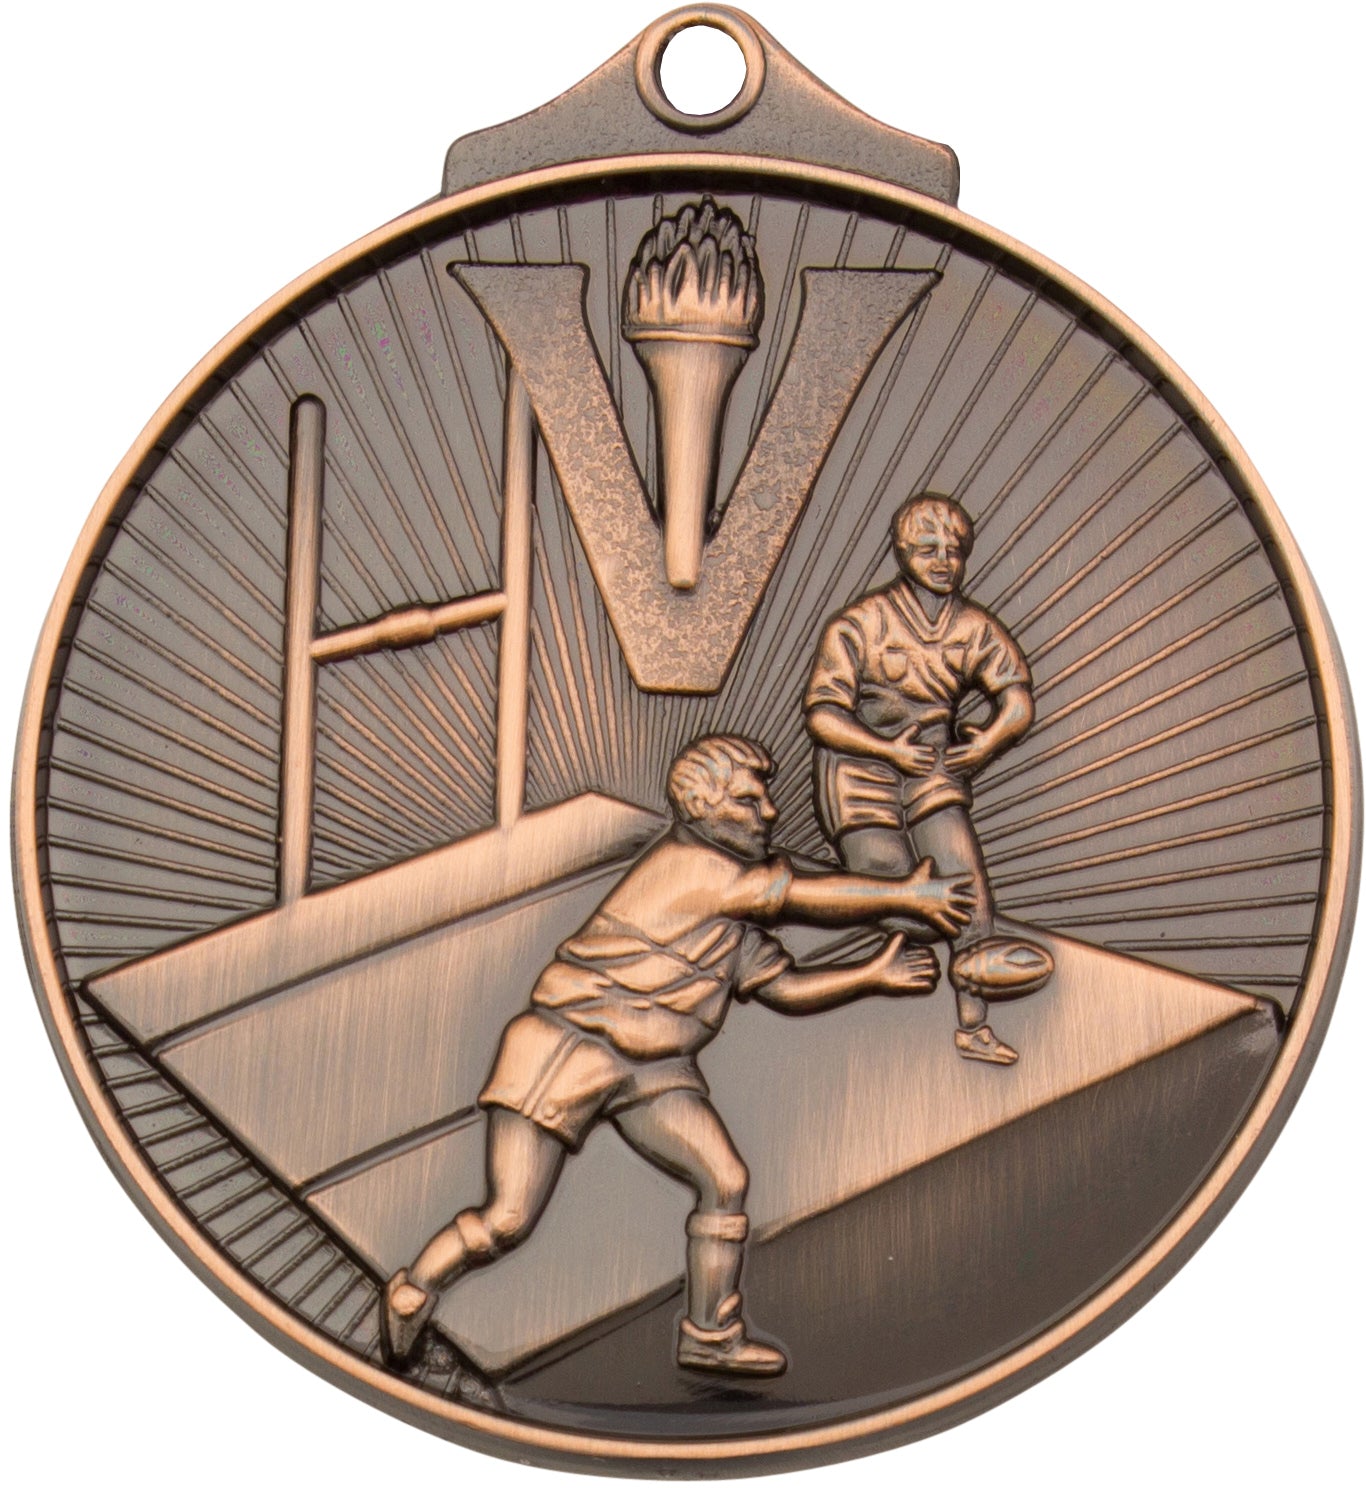 MD913 Rugby Medal